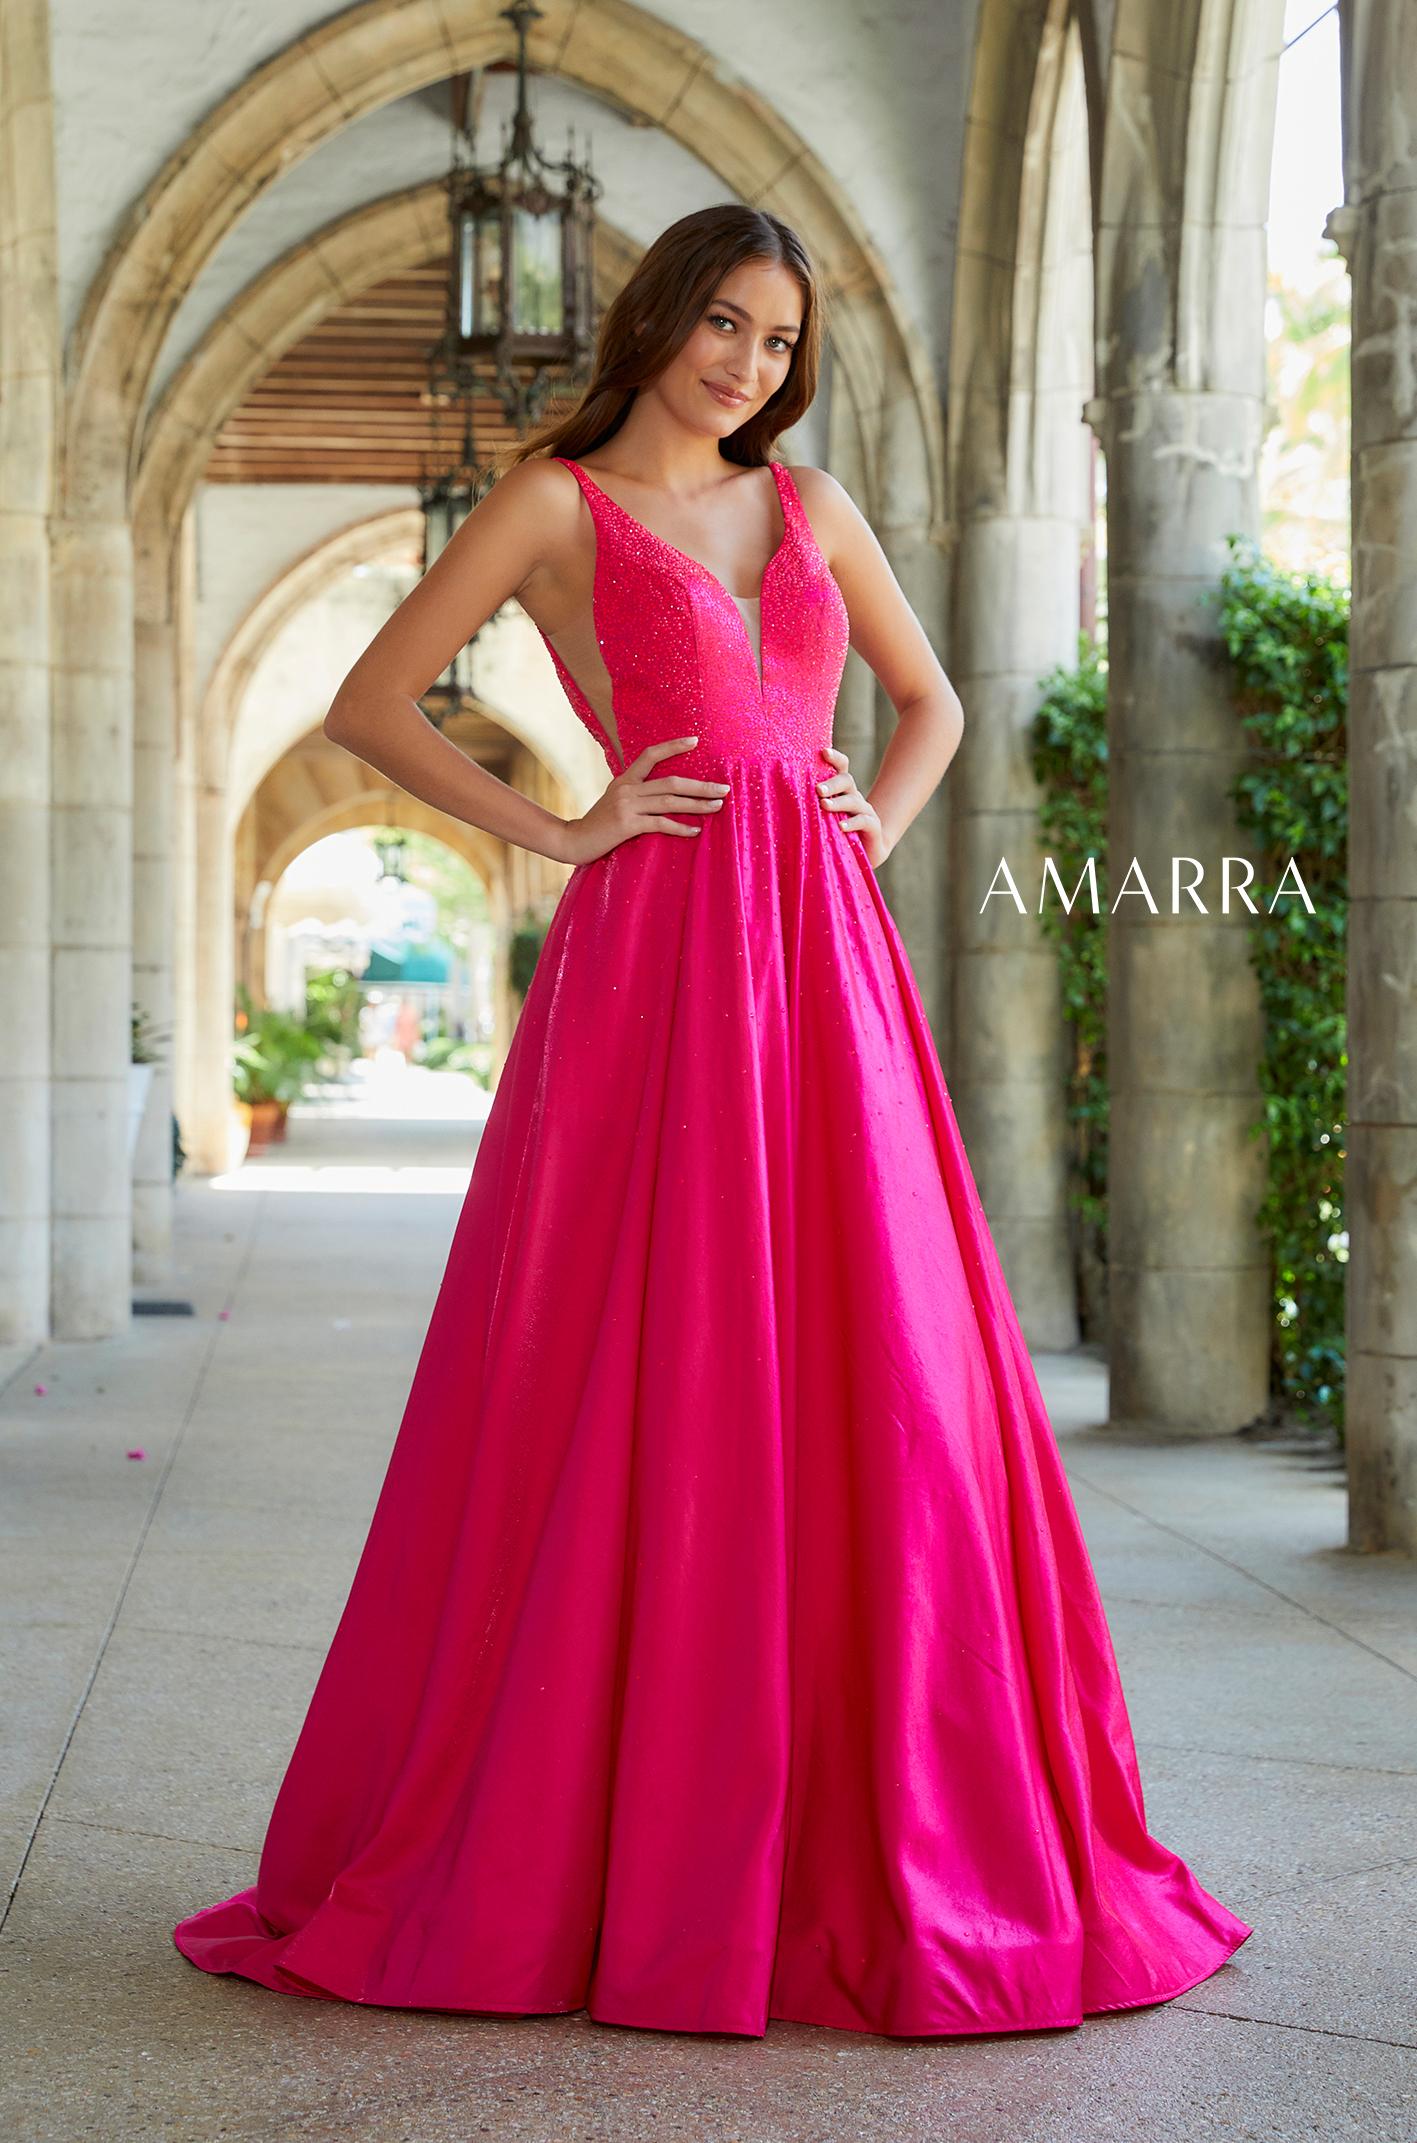 Amarra 87309 Long A Line V Neck Prom Dress Pockets Backless Formal Ball Gown Rhinestone ball gown featuring a V-neckline, side panels, open back, and sweep train. Satin  Available Sizes: 00-16  Available Colors: Bright Fuchsia, Purple, Turquoise